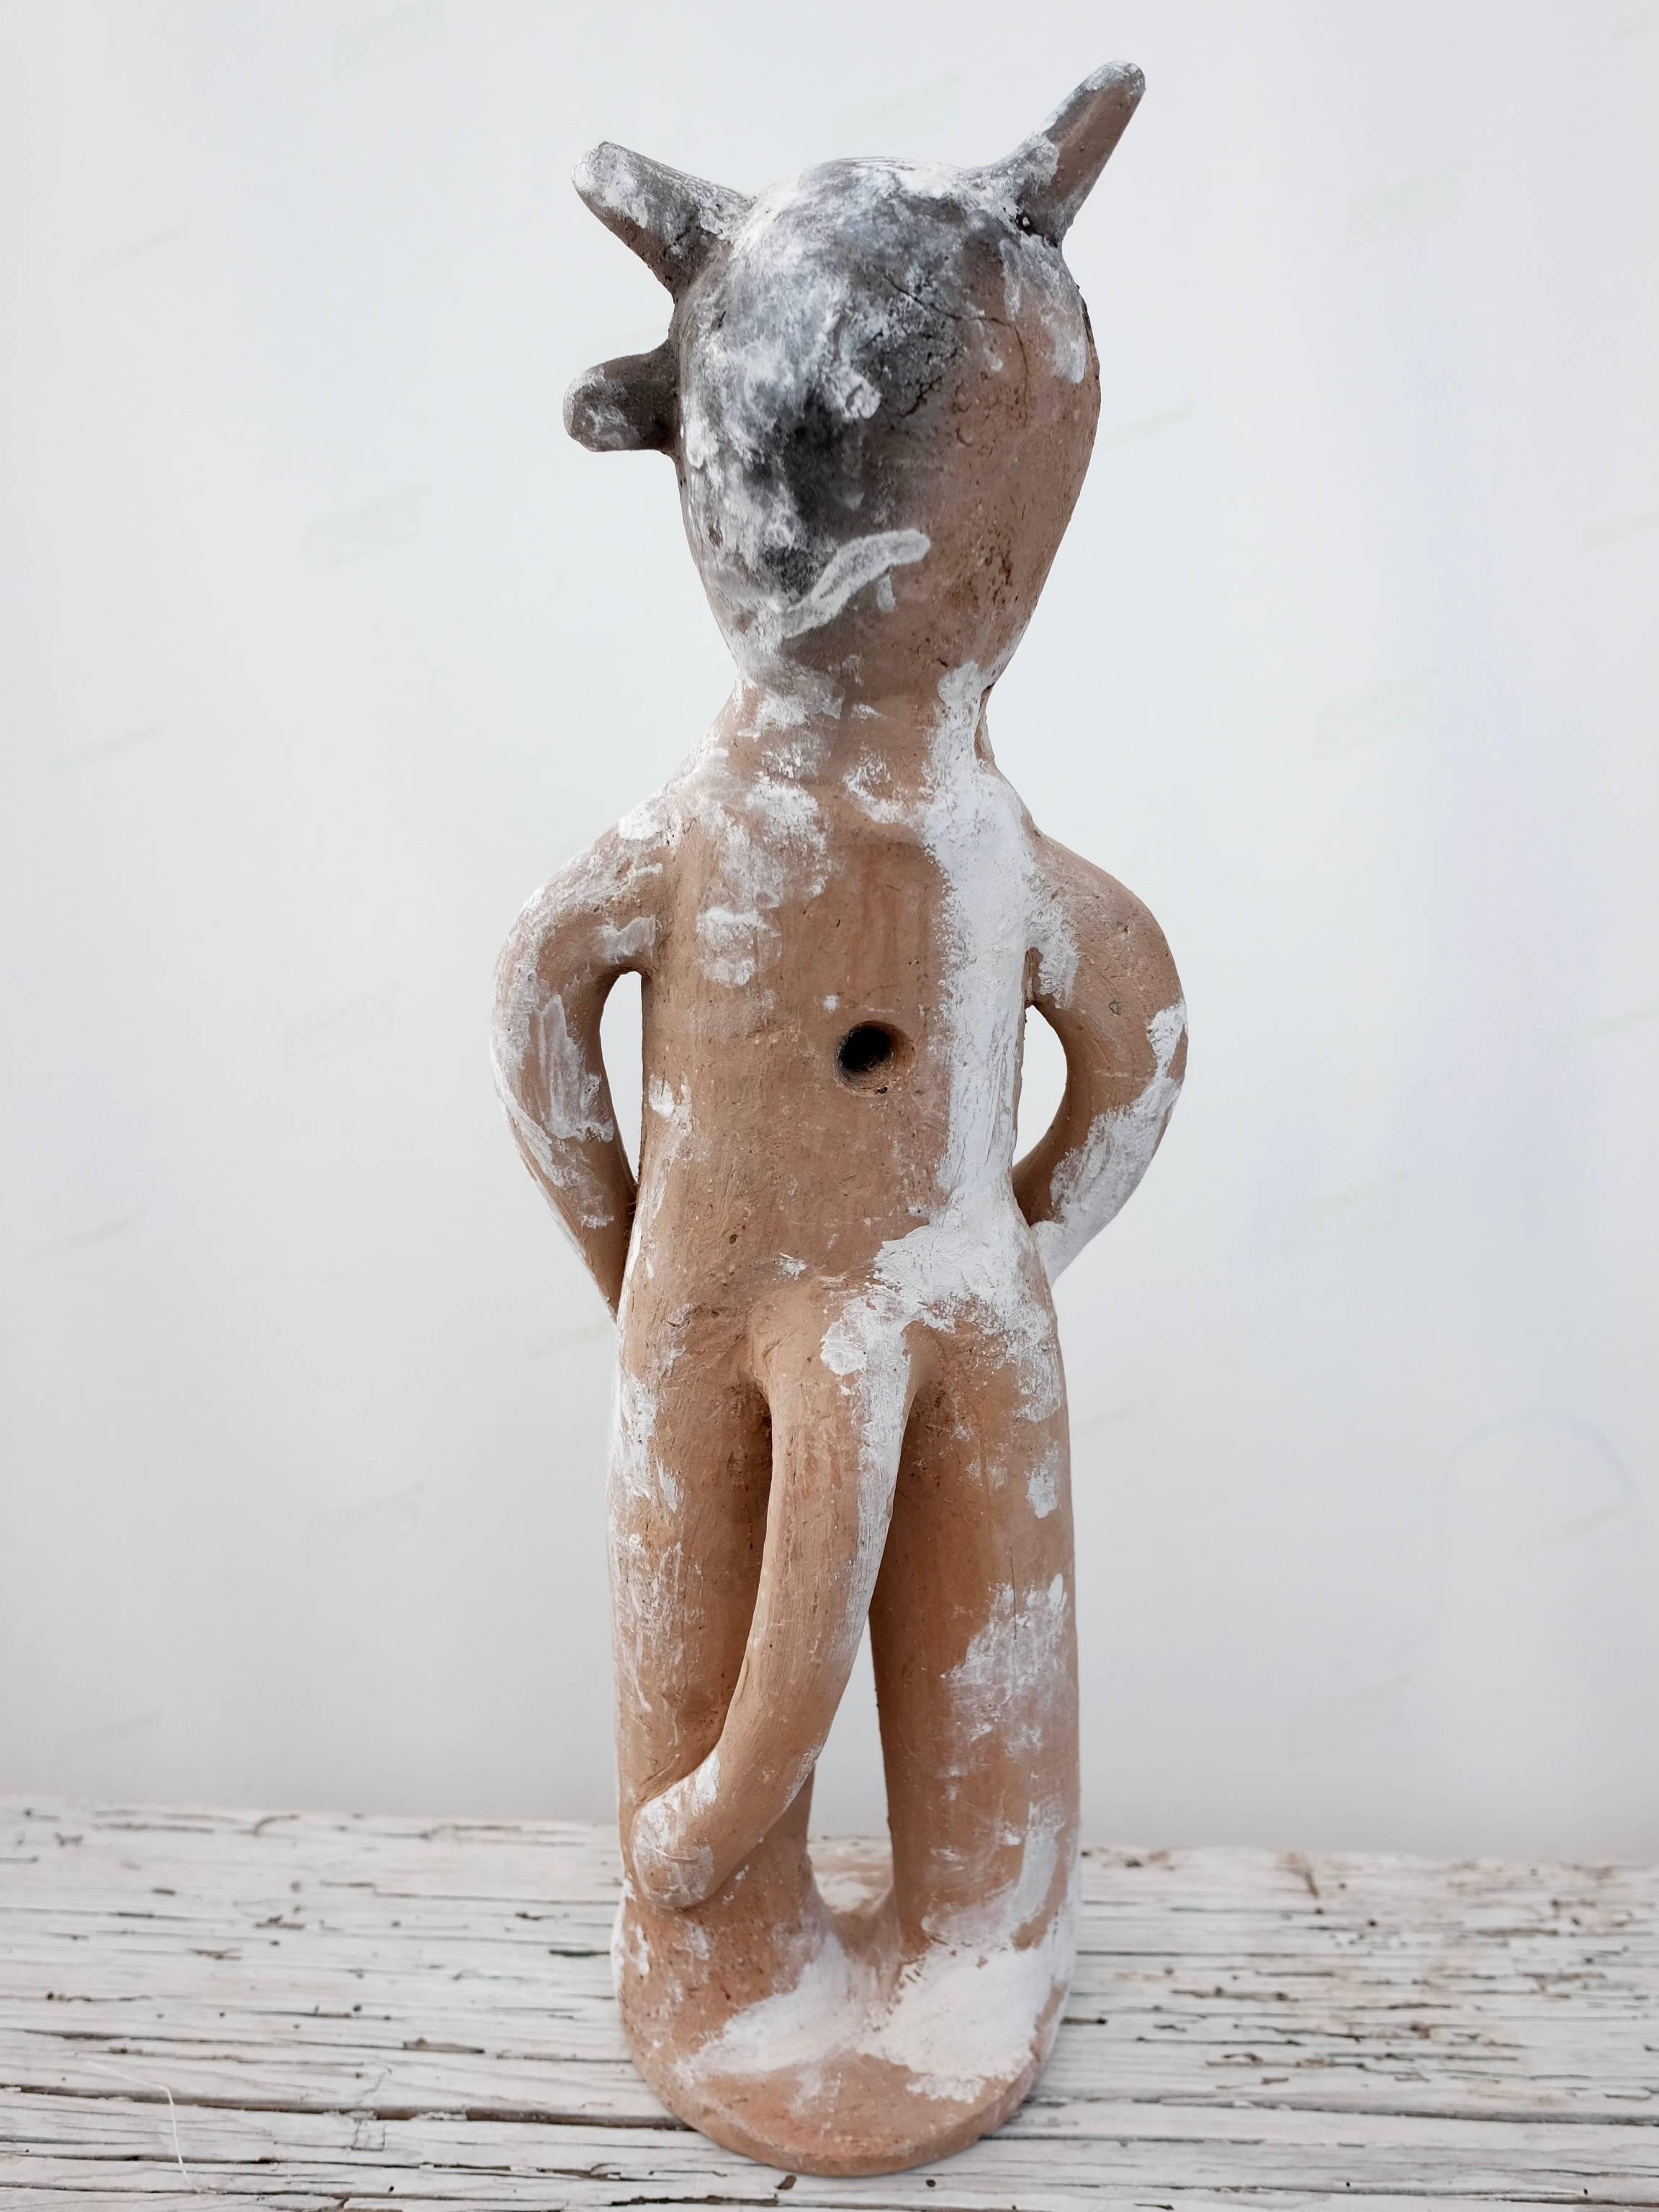 Fired Contemporary Clay Sculpture by Serapio Medrano from Jalisco, Mexico